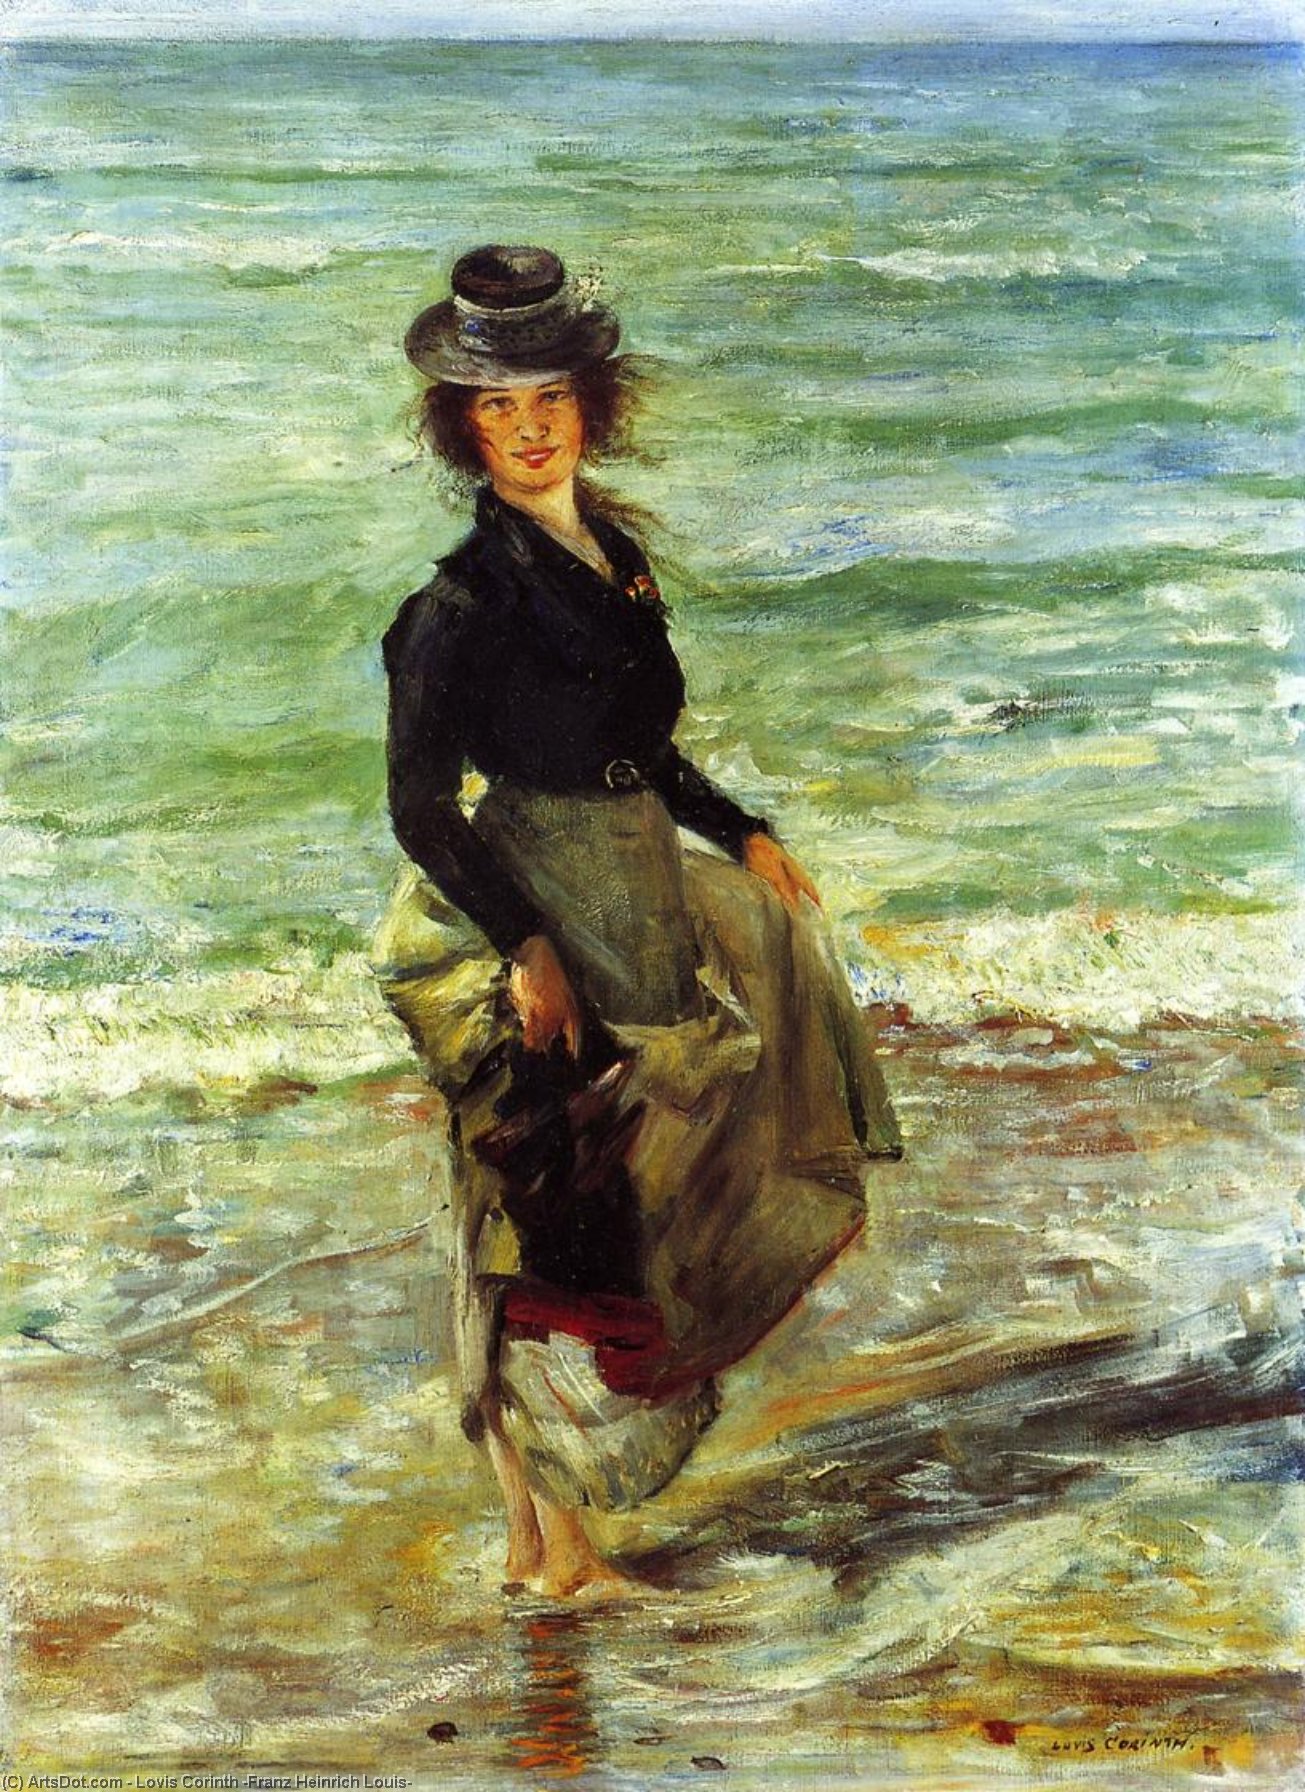 Order Oil Painting Replica Paddel-Petermannchen (also known as Charlotte Berend Paddling), 1902 by Lovis Corinth (Franz Heinrich Louis) (1858-1925, Netherlands) | ArtsDot.com